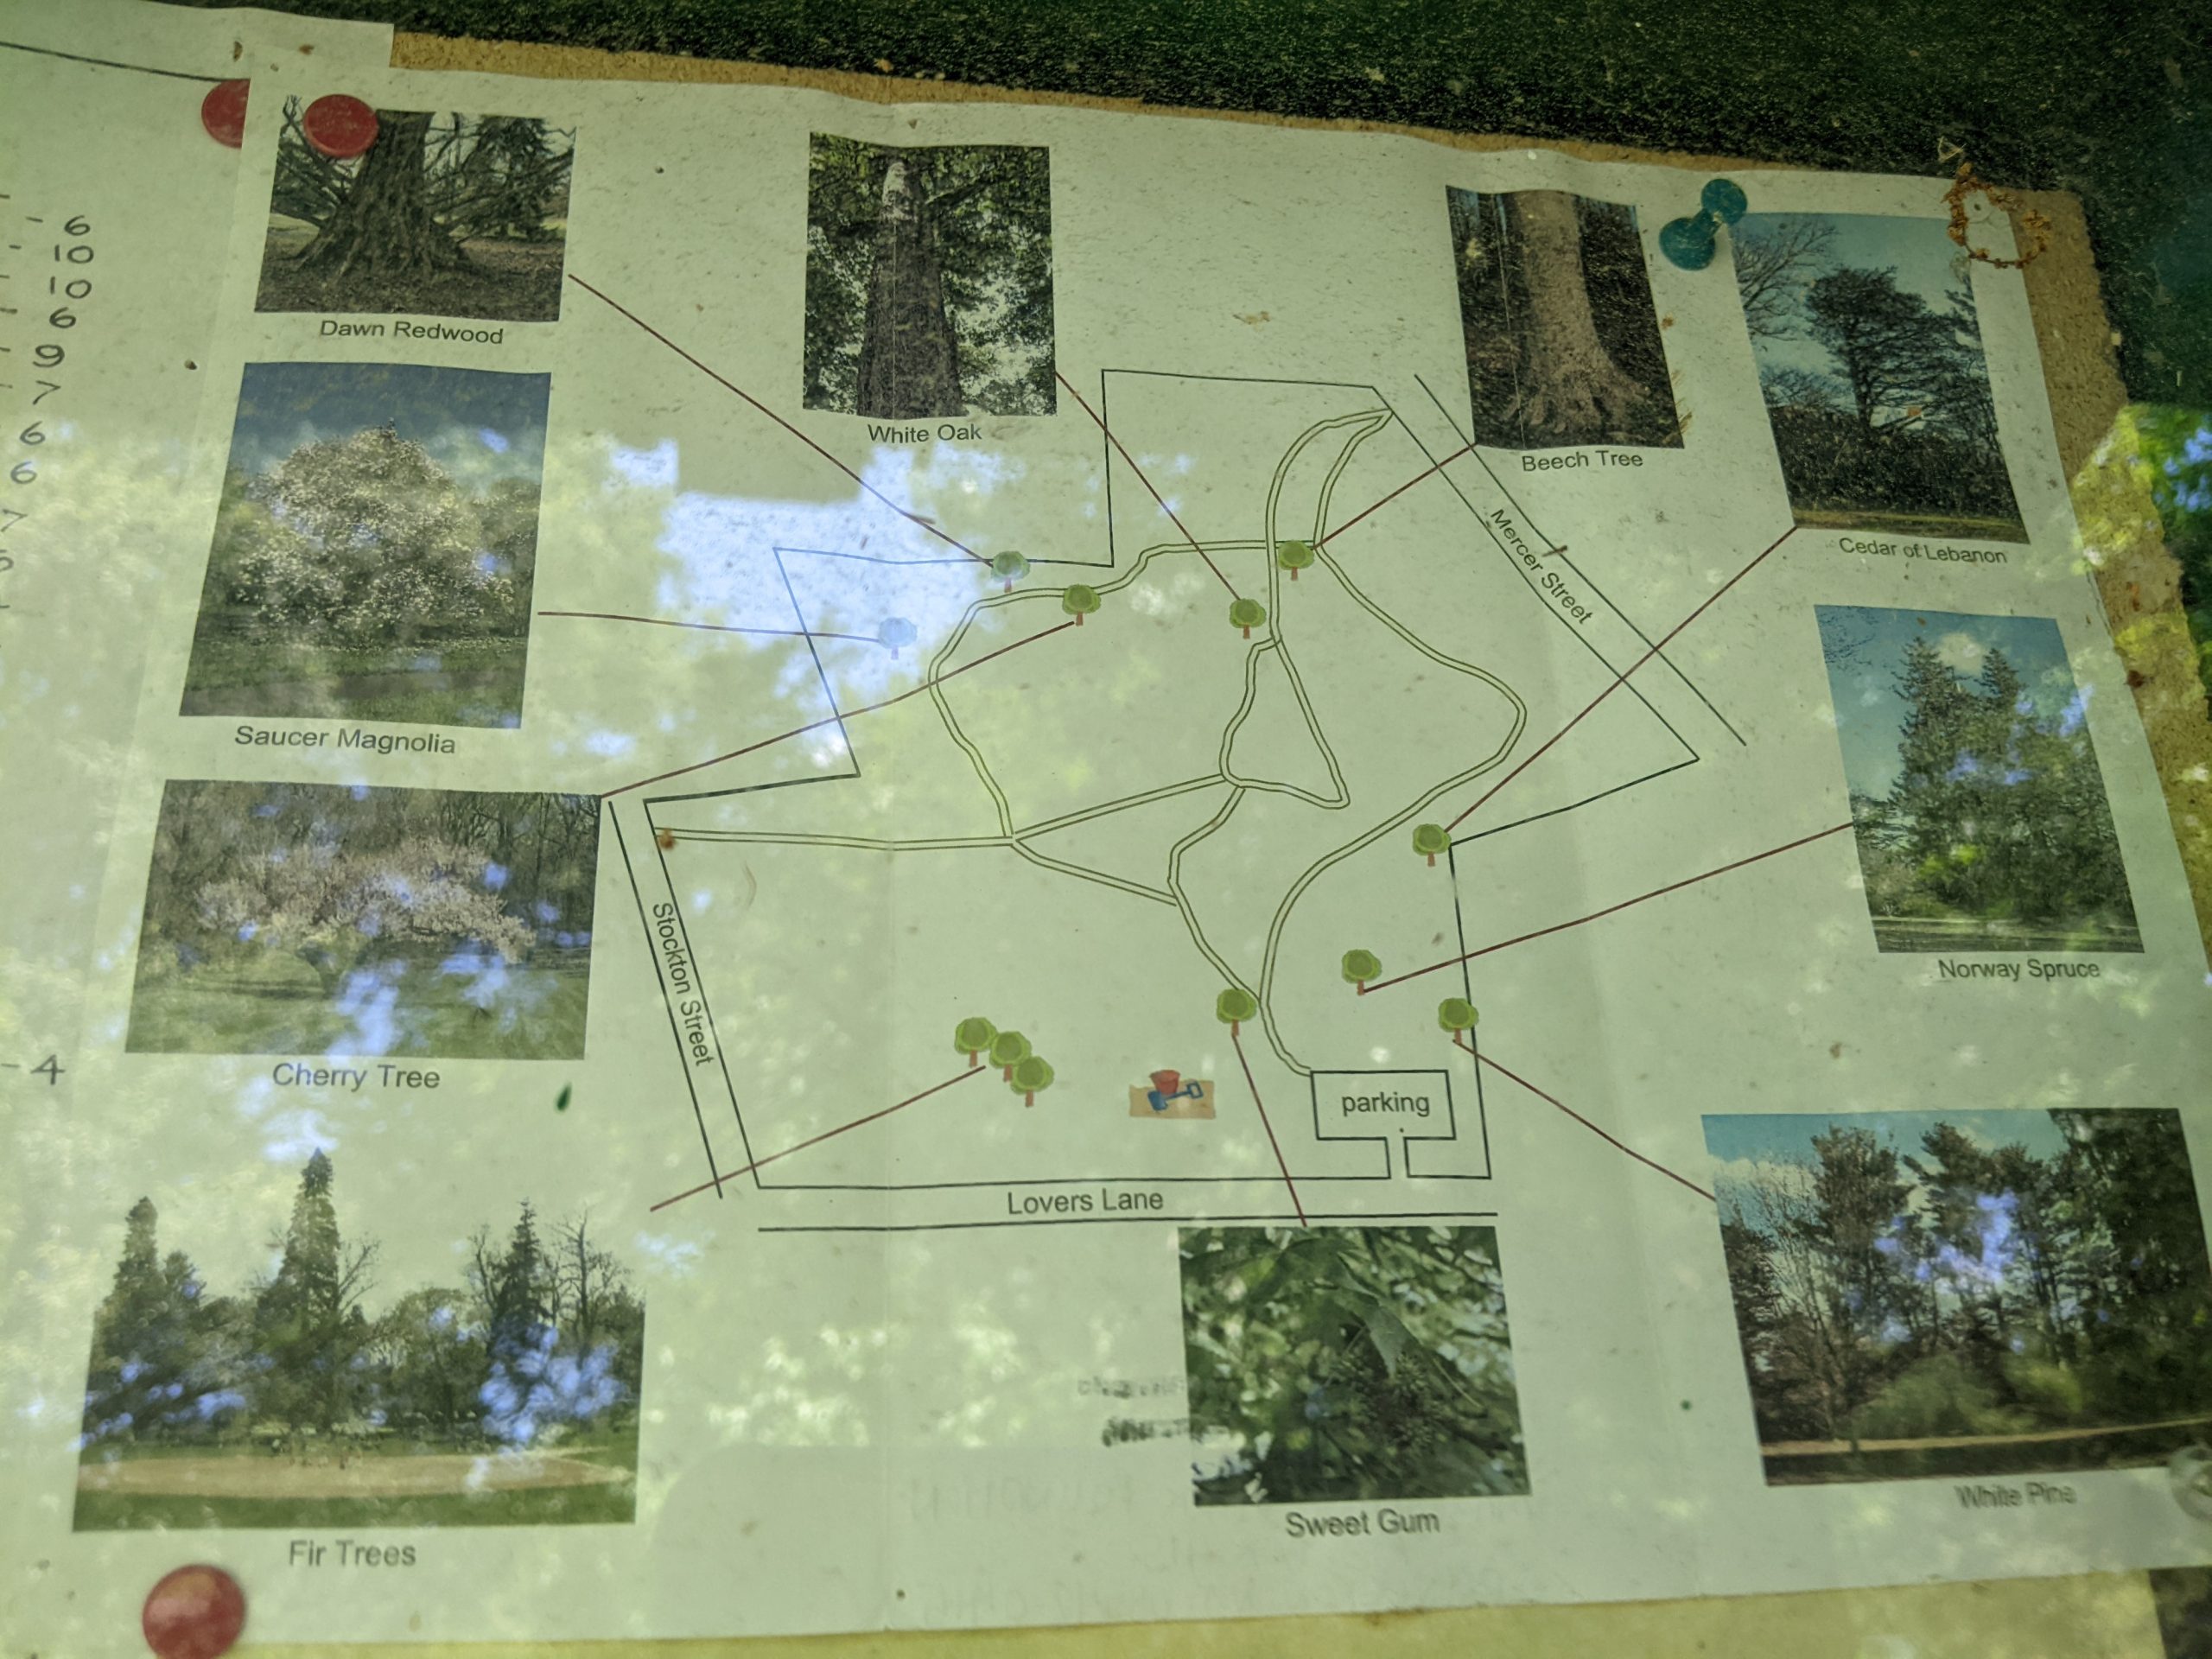 EXTRAS - Walking Path - Tree map at Marquand Park in Princeton NJ